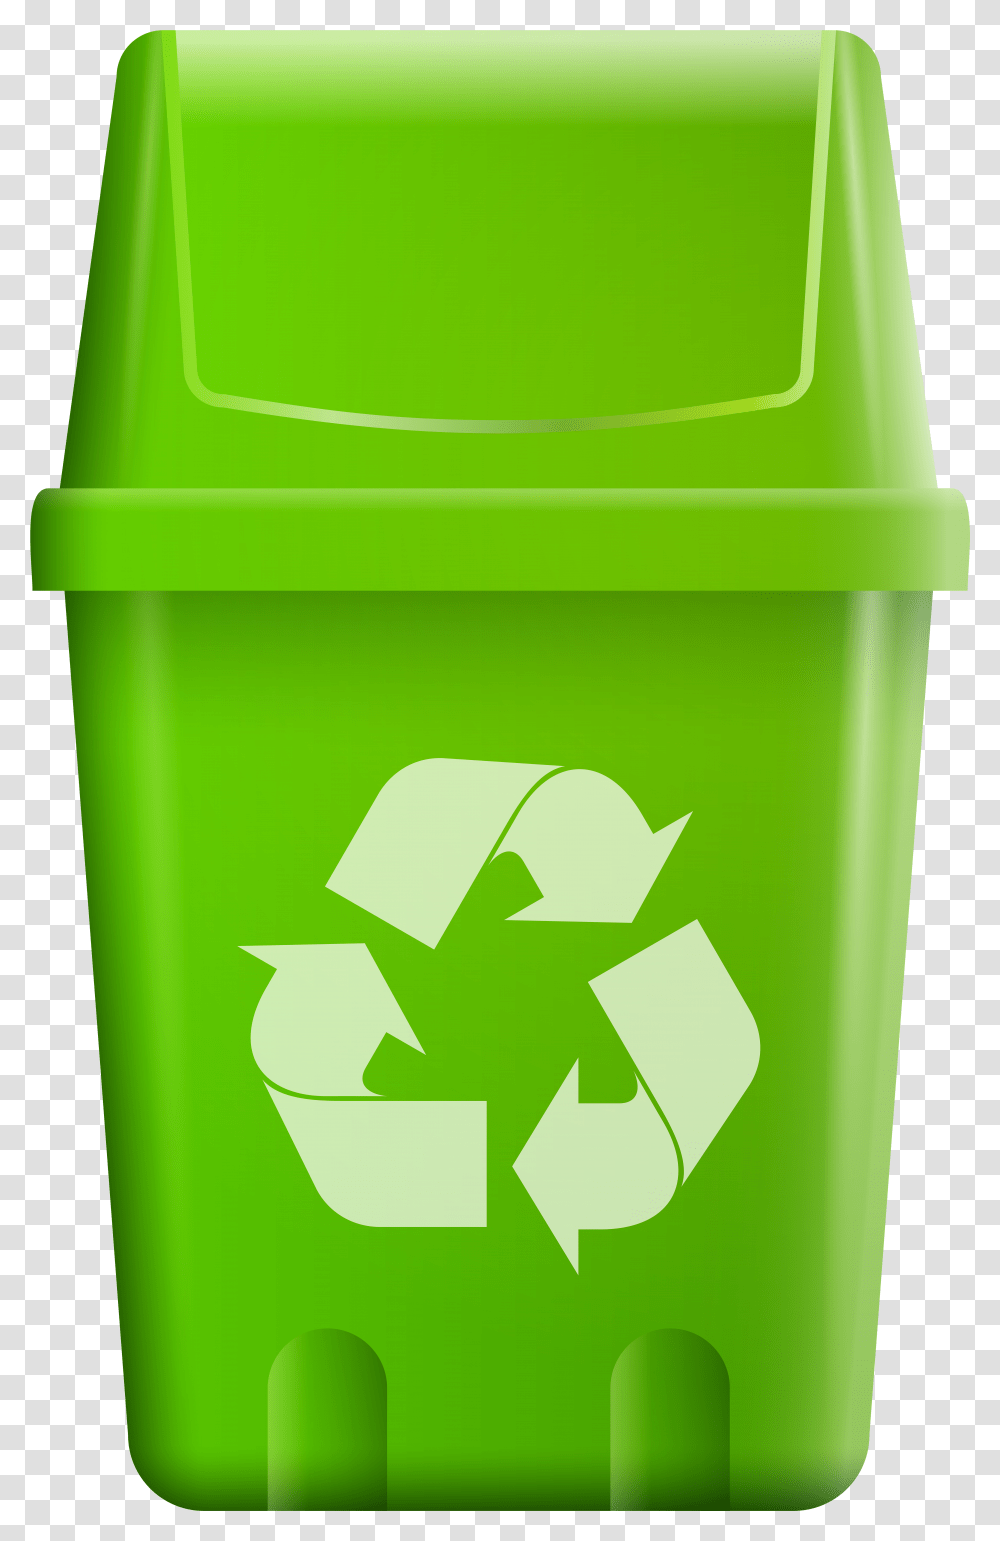 Trash Bin With Recycle Symbol Clip Art Trash Can With Recycling Symbol, Plastic Transparent Png